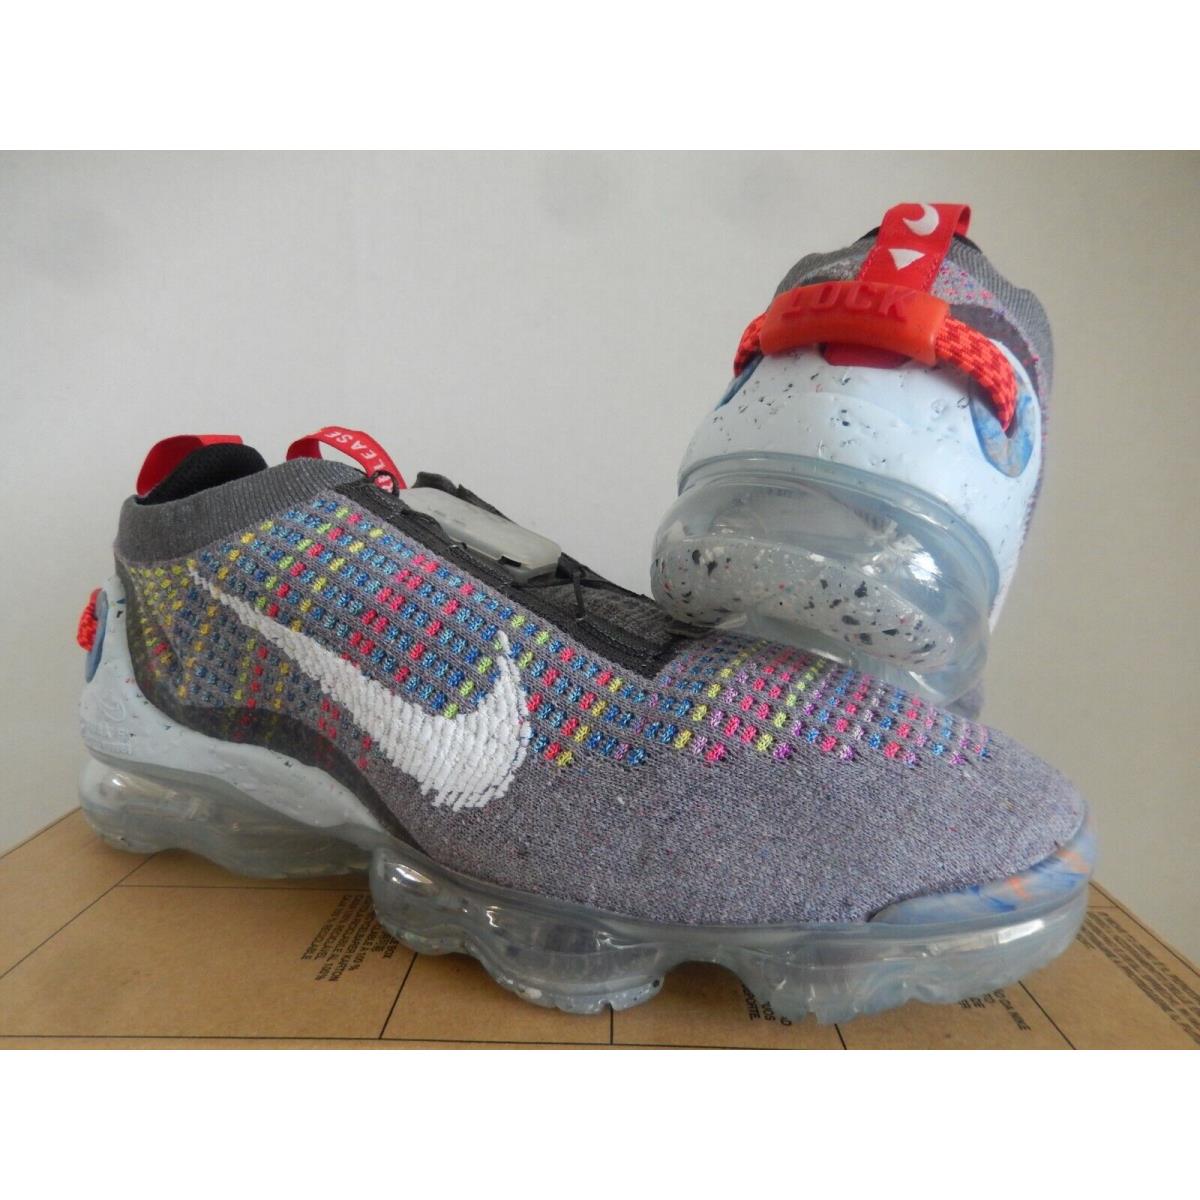 Nike shoes Air Vapormax Flyknit - Multicolor 0